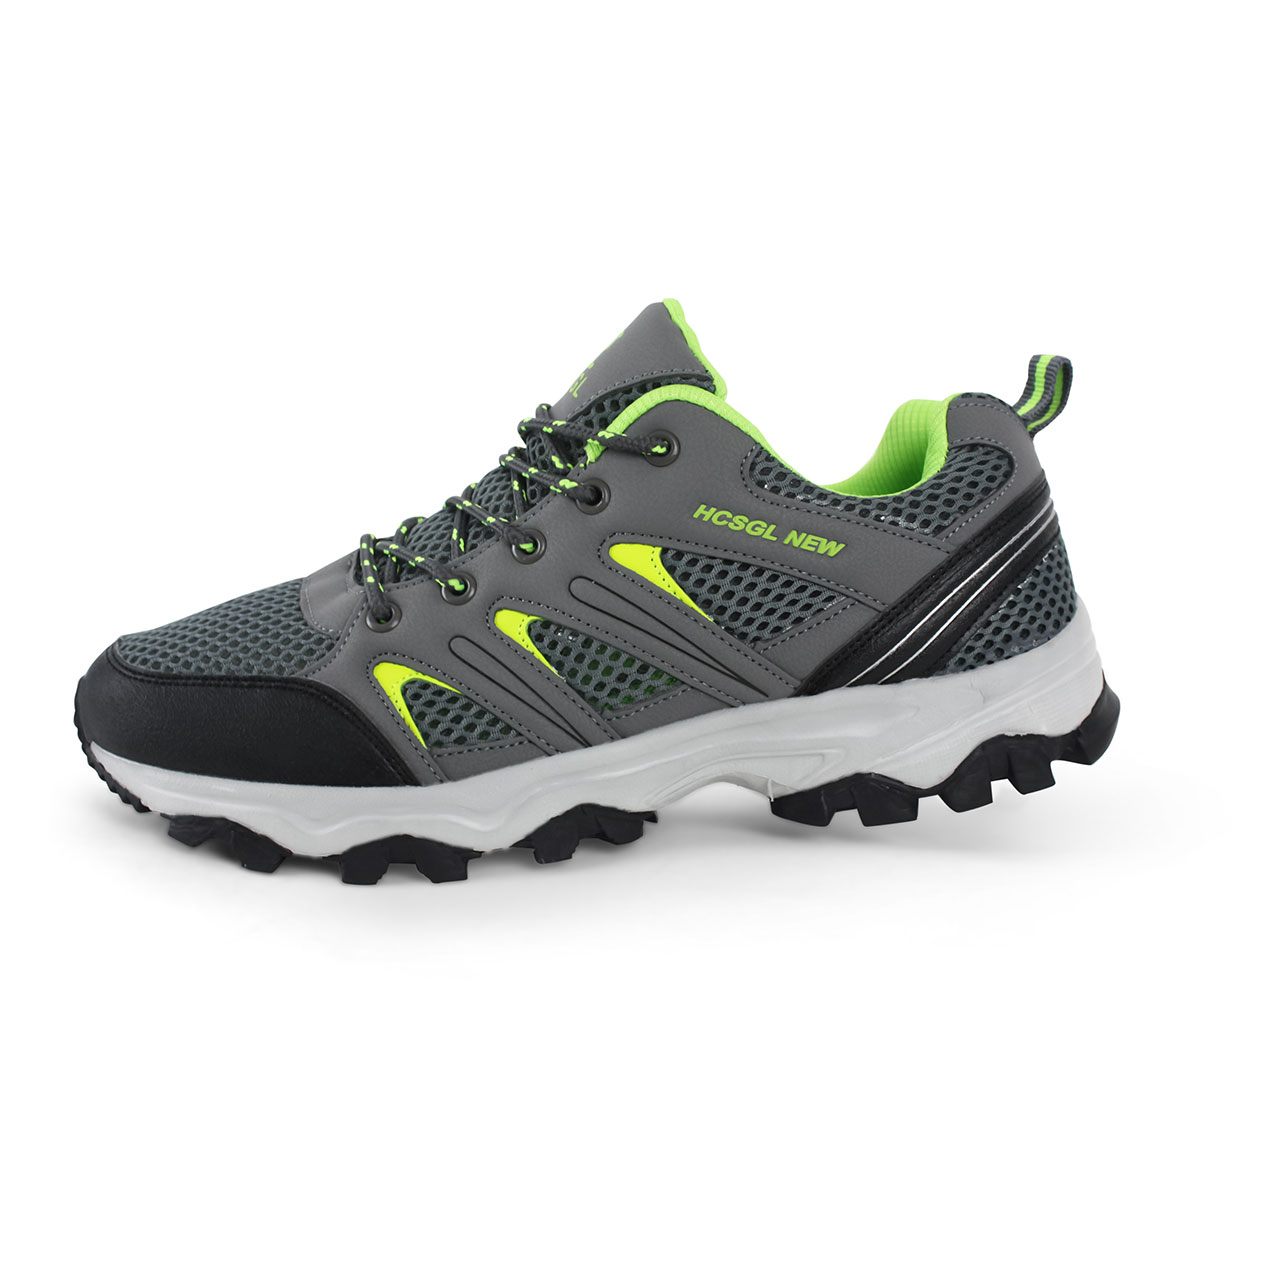 Men's Ash Outdoor Multisport Training Athletic Leather Shoes